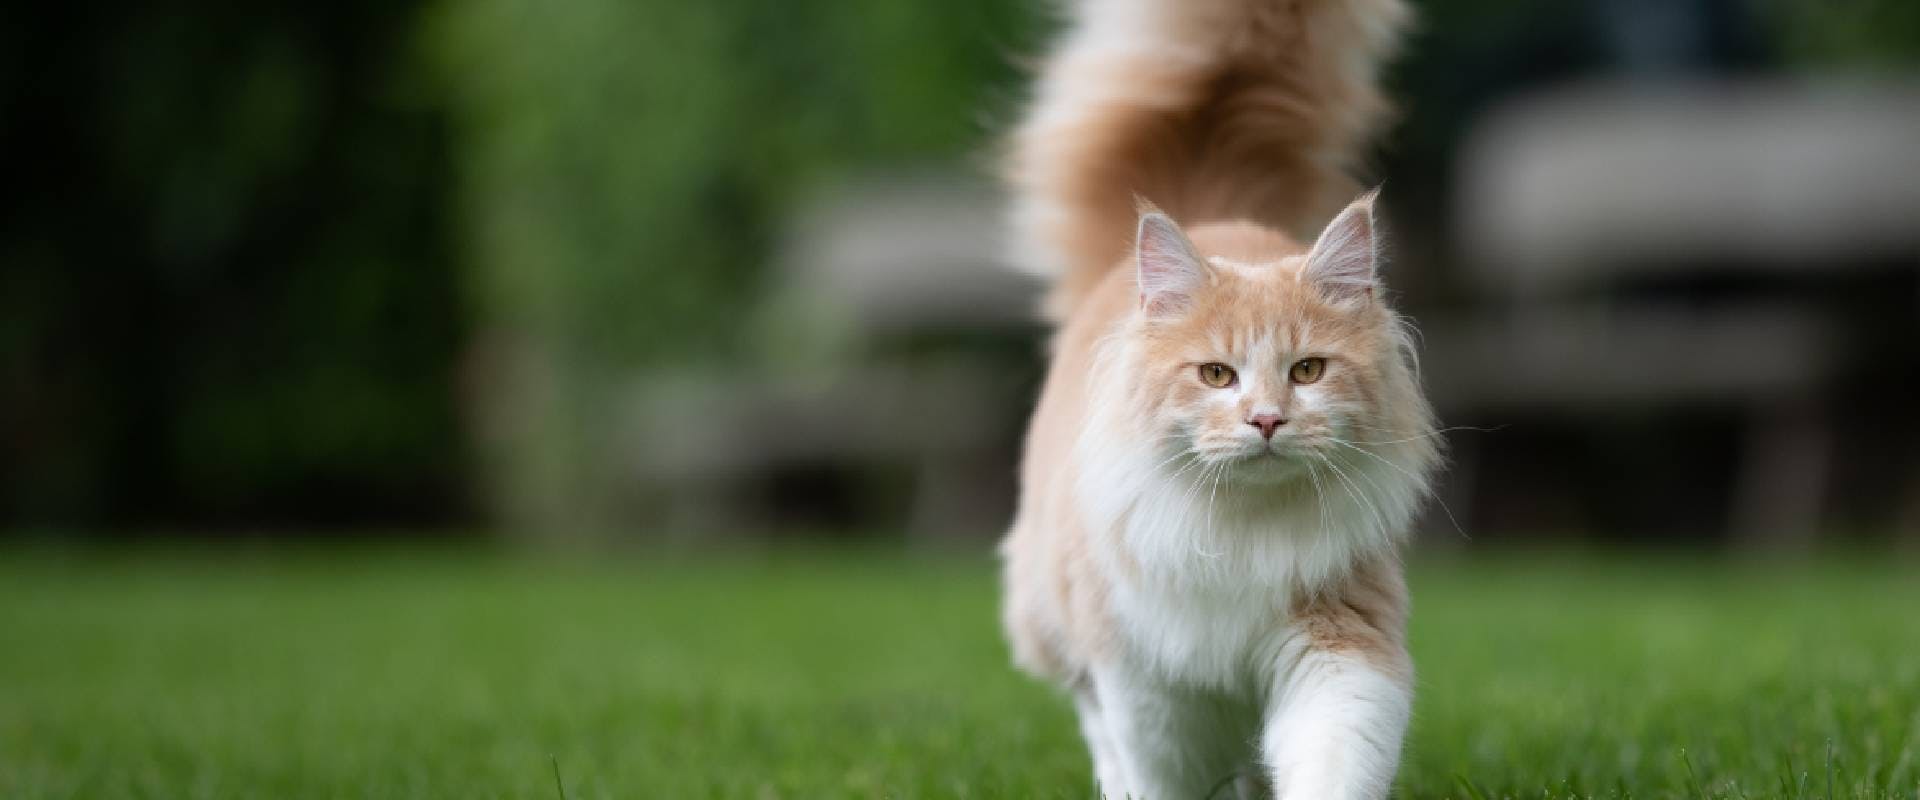 Beige white Maine Coon cat with an upturned cat tail